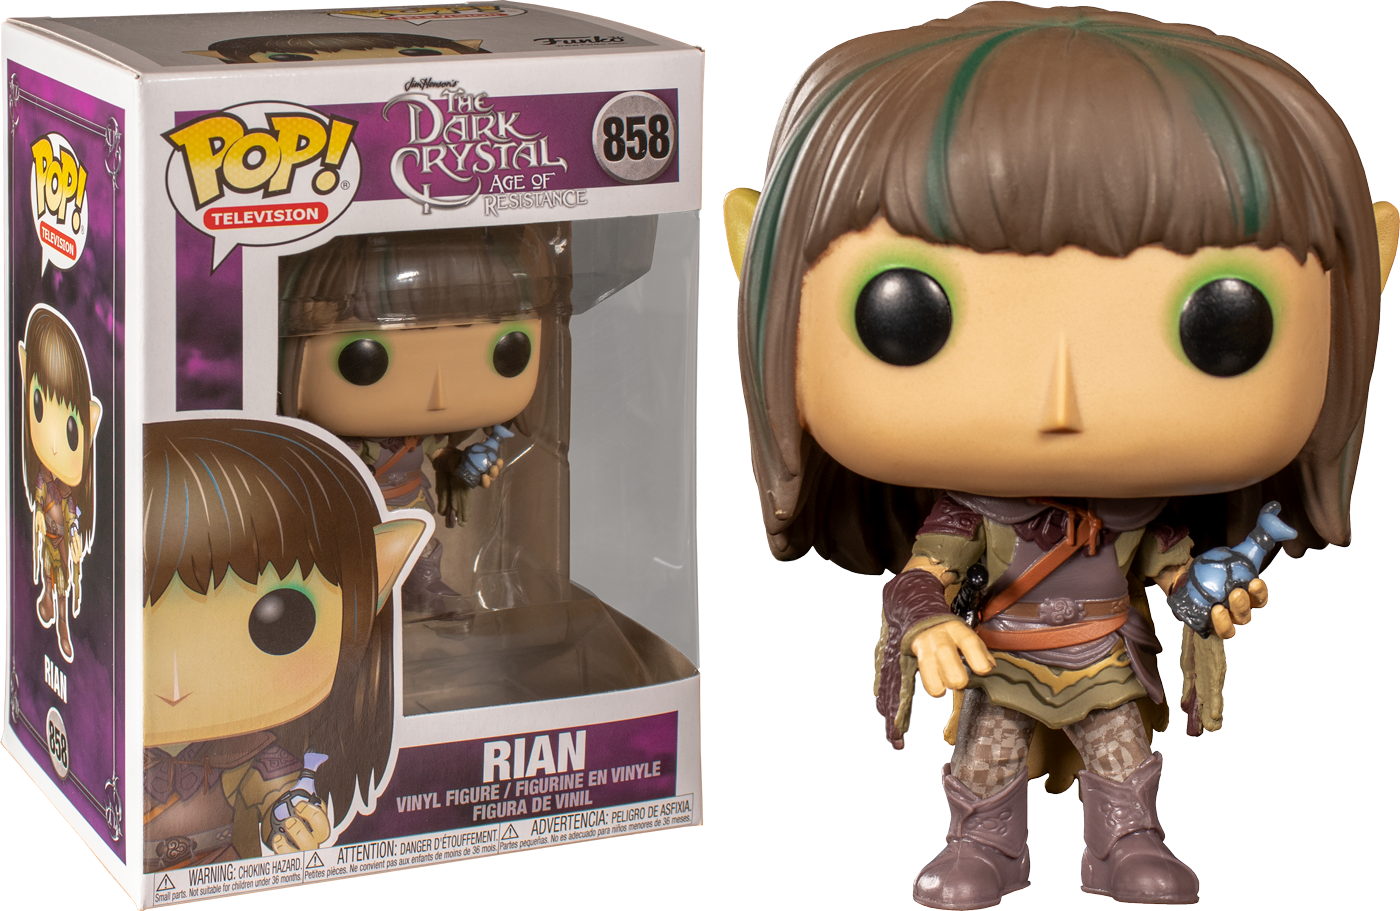 Pop! Television The Dark Crystal: Age of Resistance Vinyl Figure Rian #858